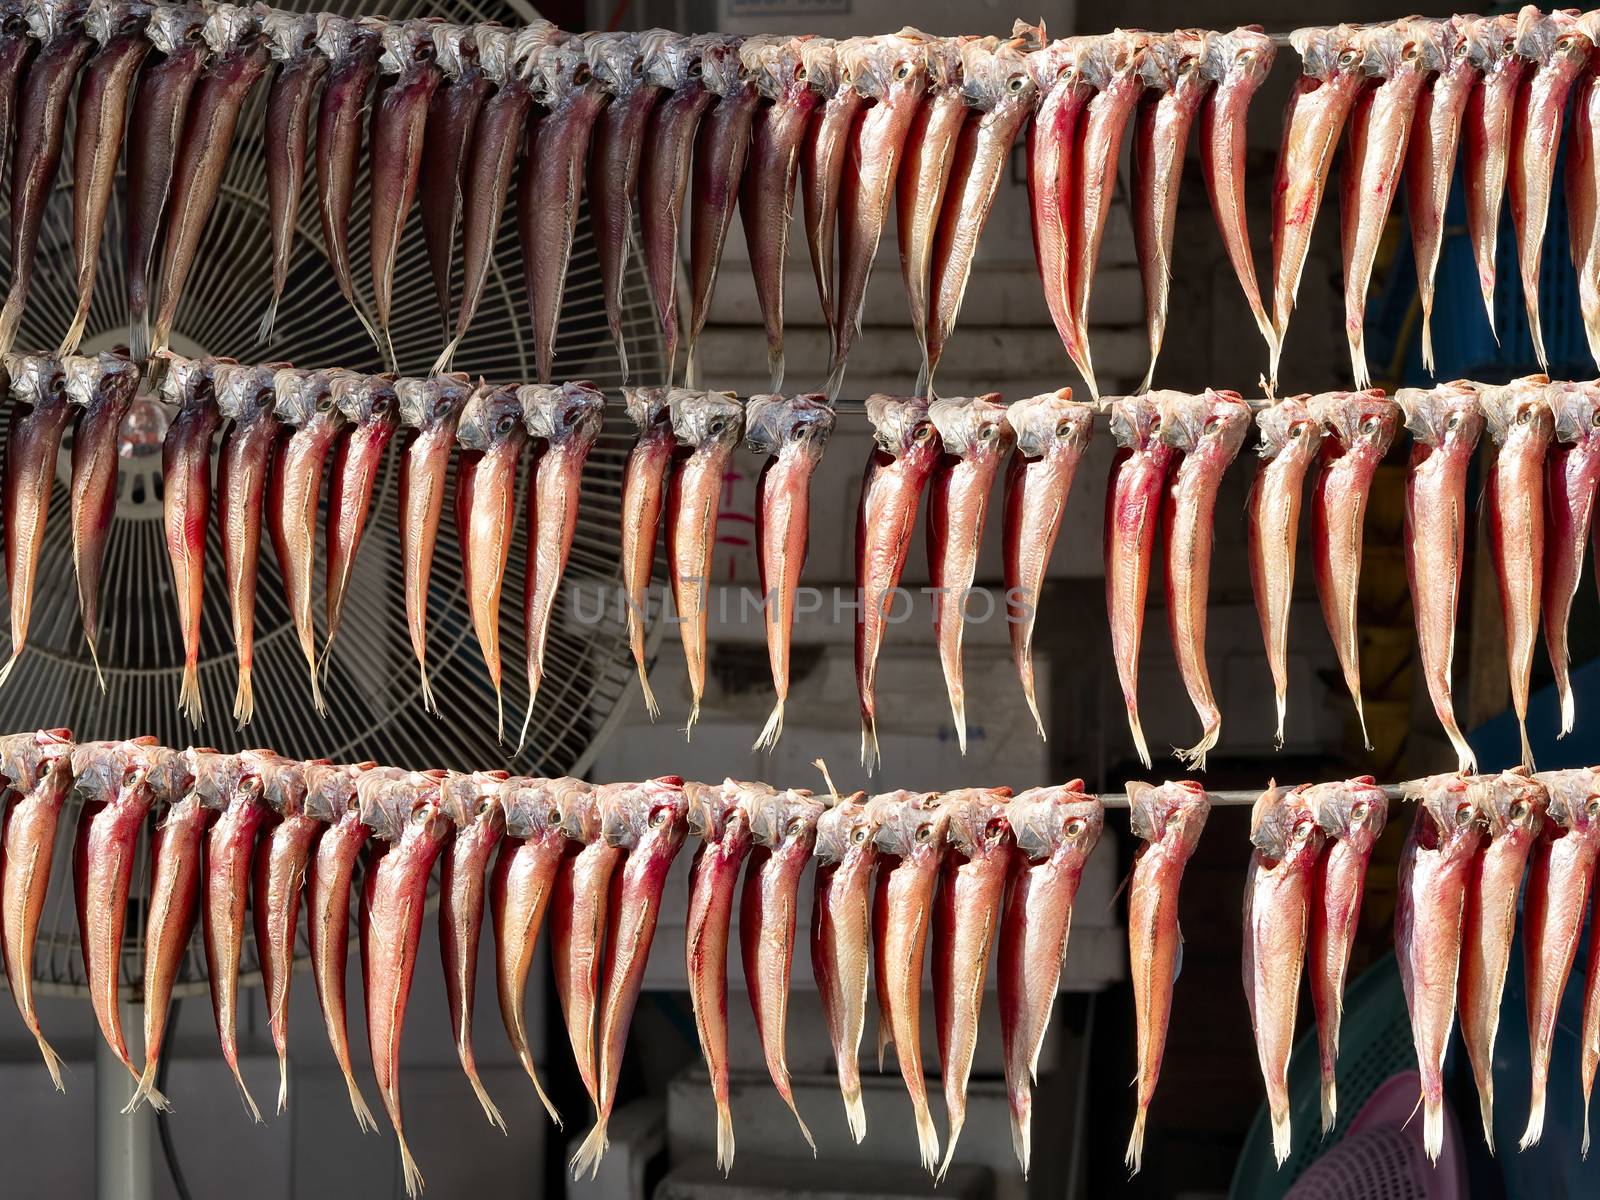 fish hung up to dry for preservation by zkruger